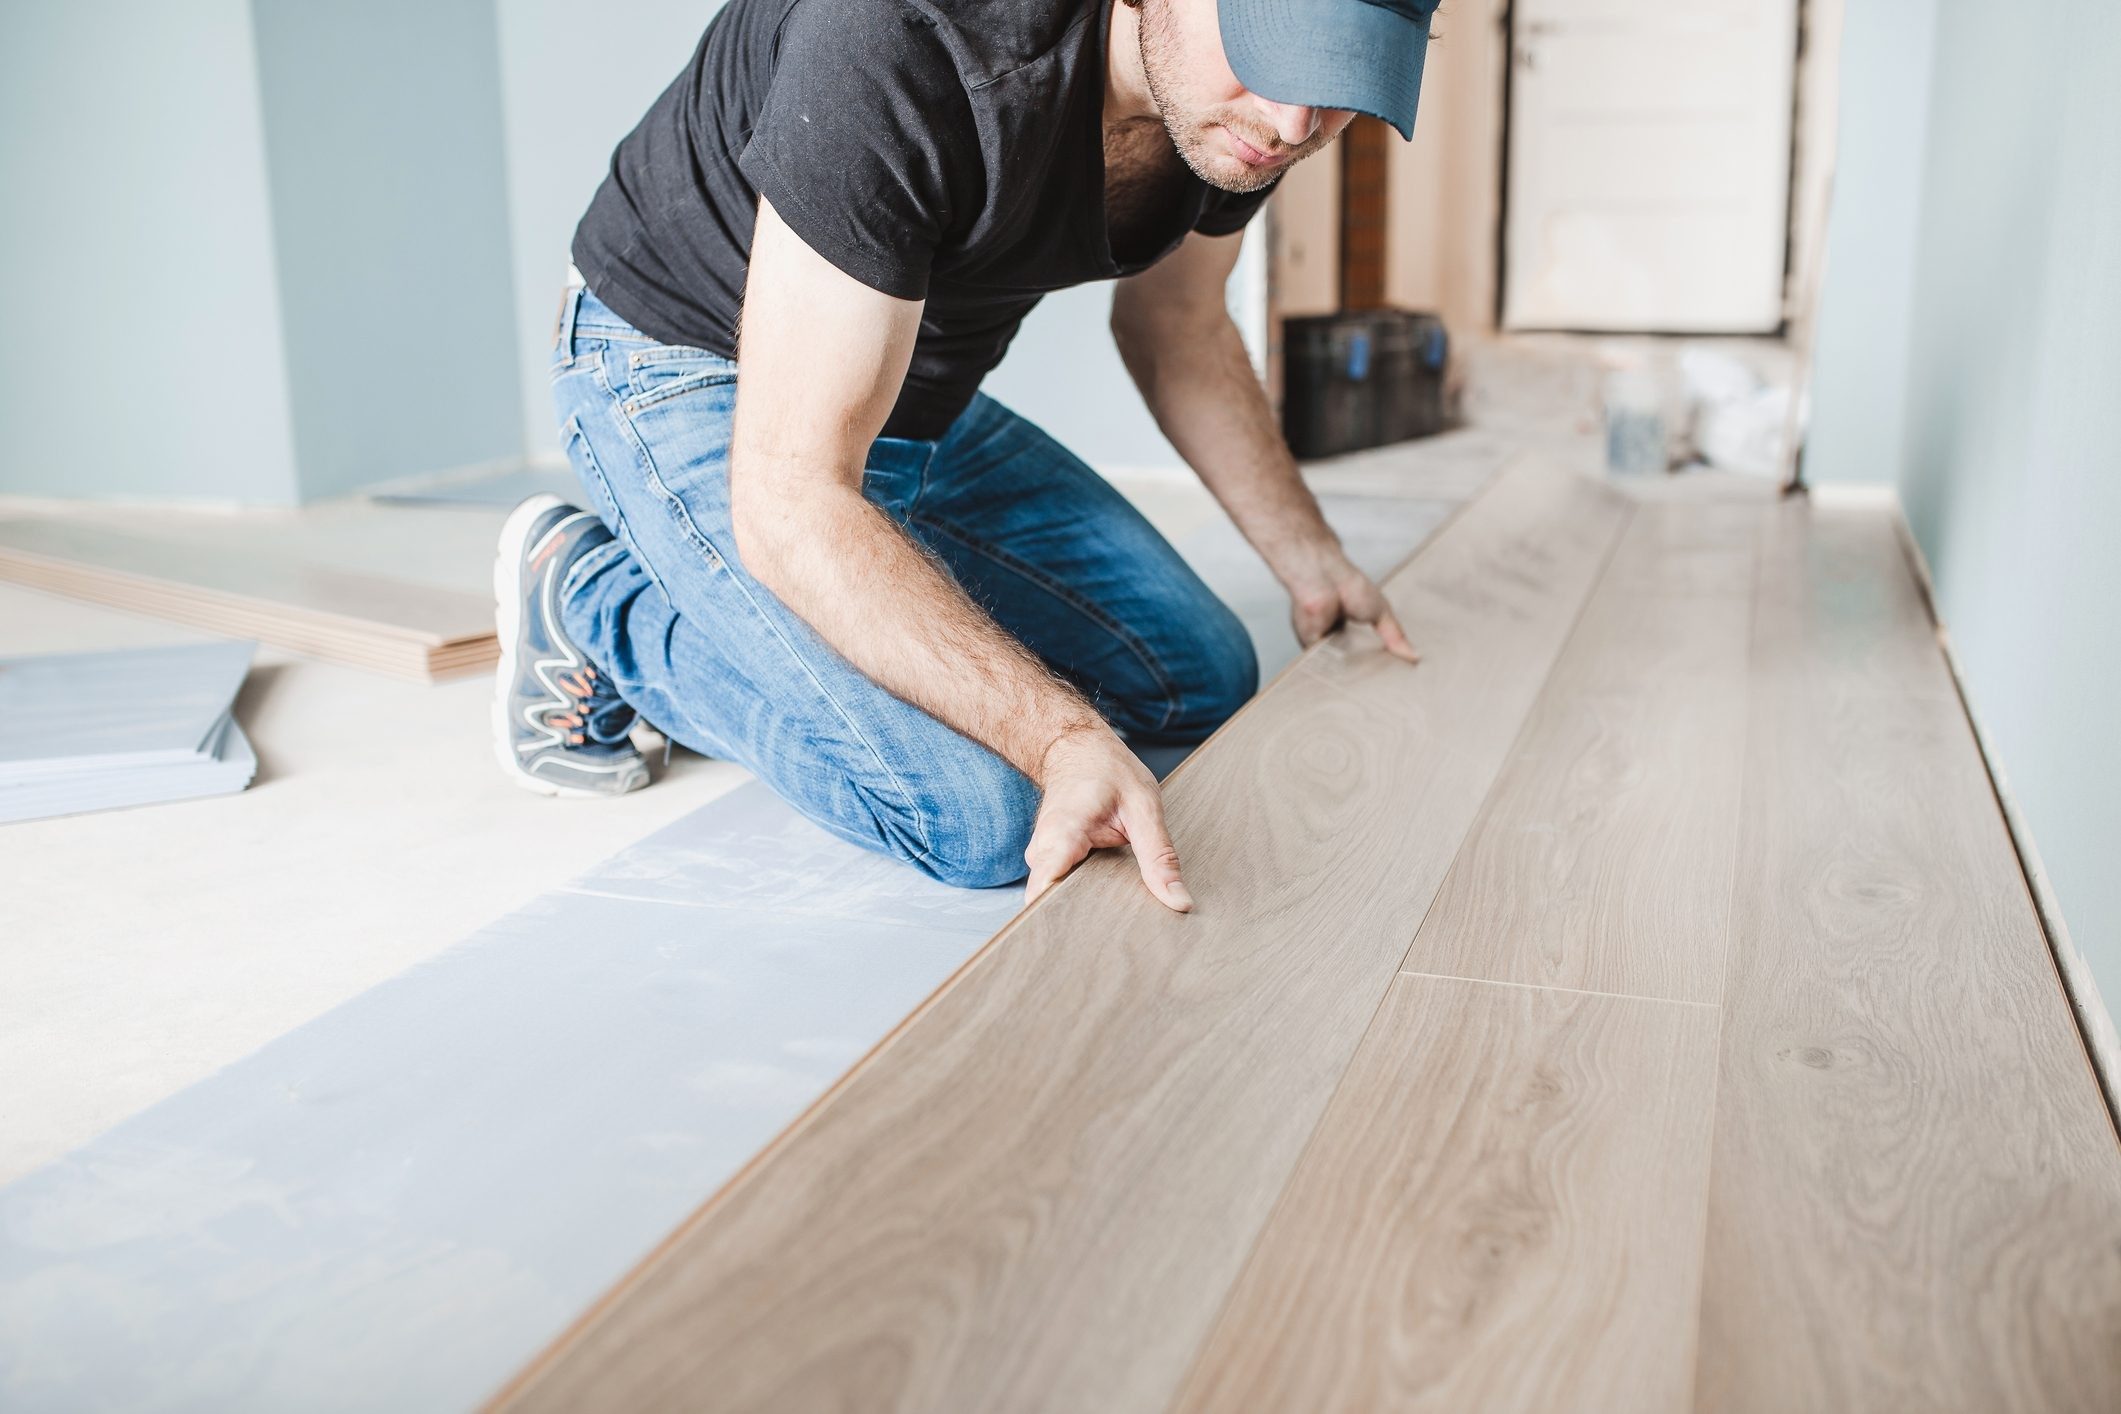 Get a Wood Look Throughout Your Entire Home with Waterproof Laminate Flooring